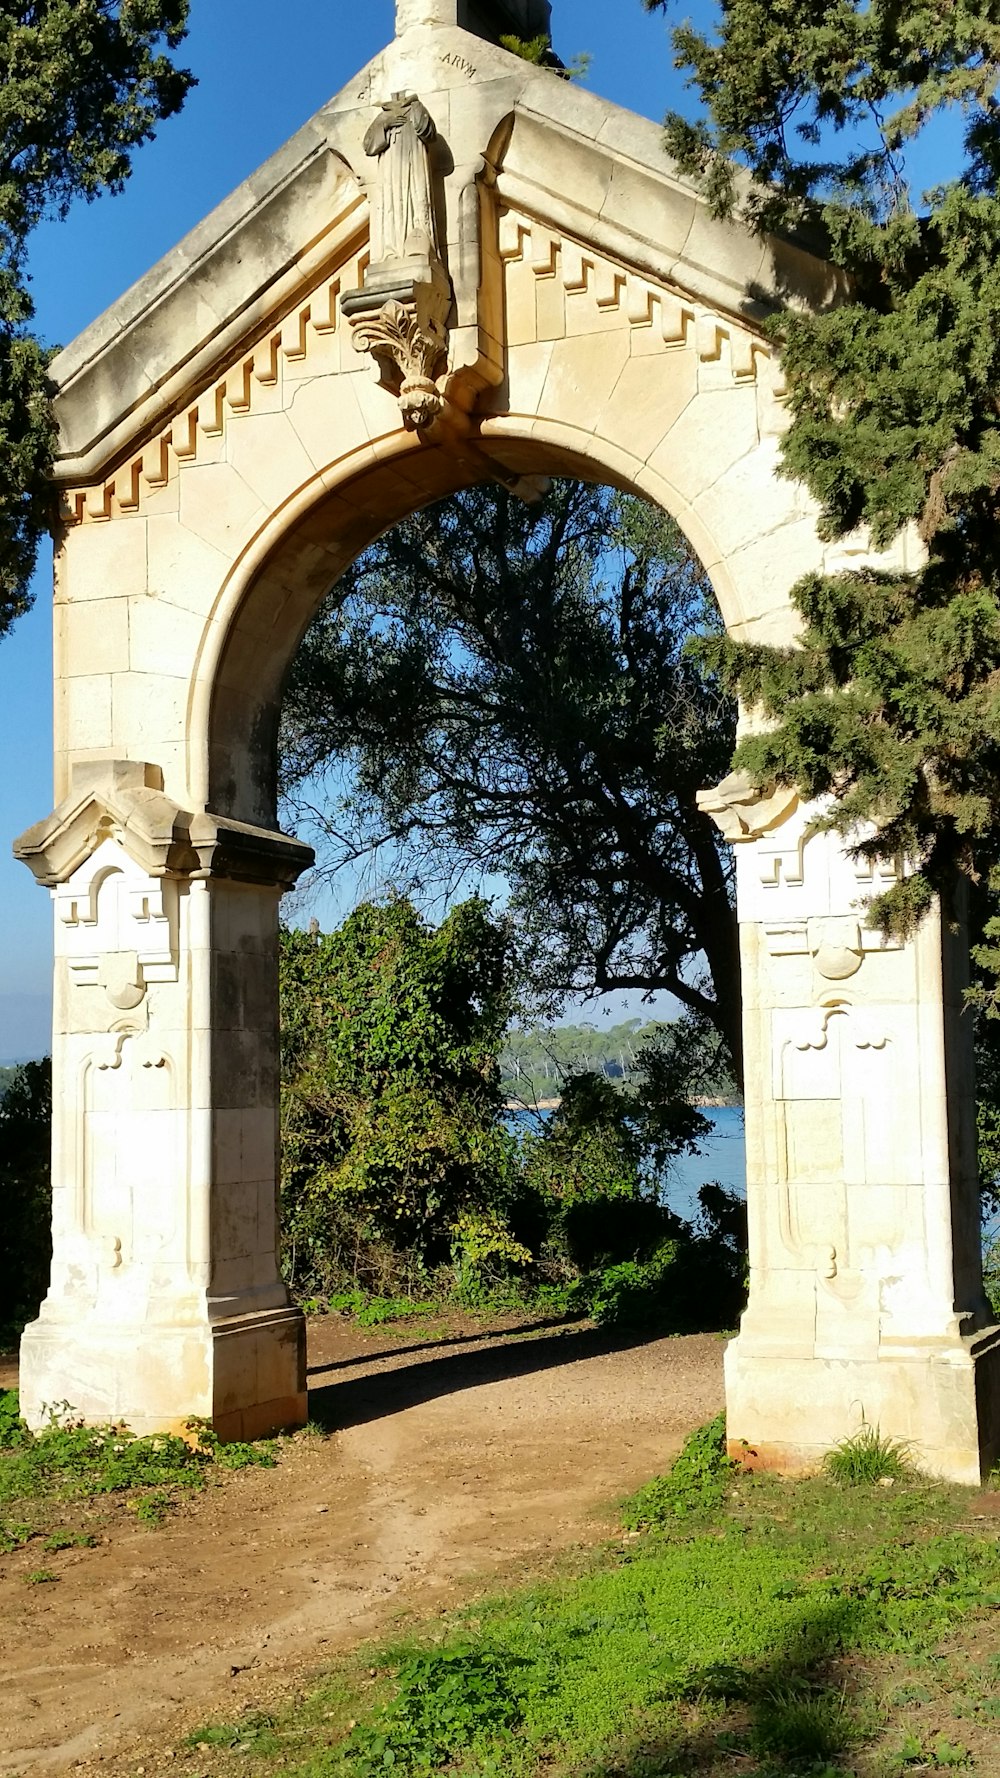 a stone archway with trees in the background